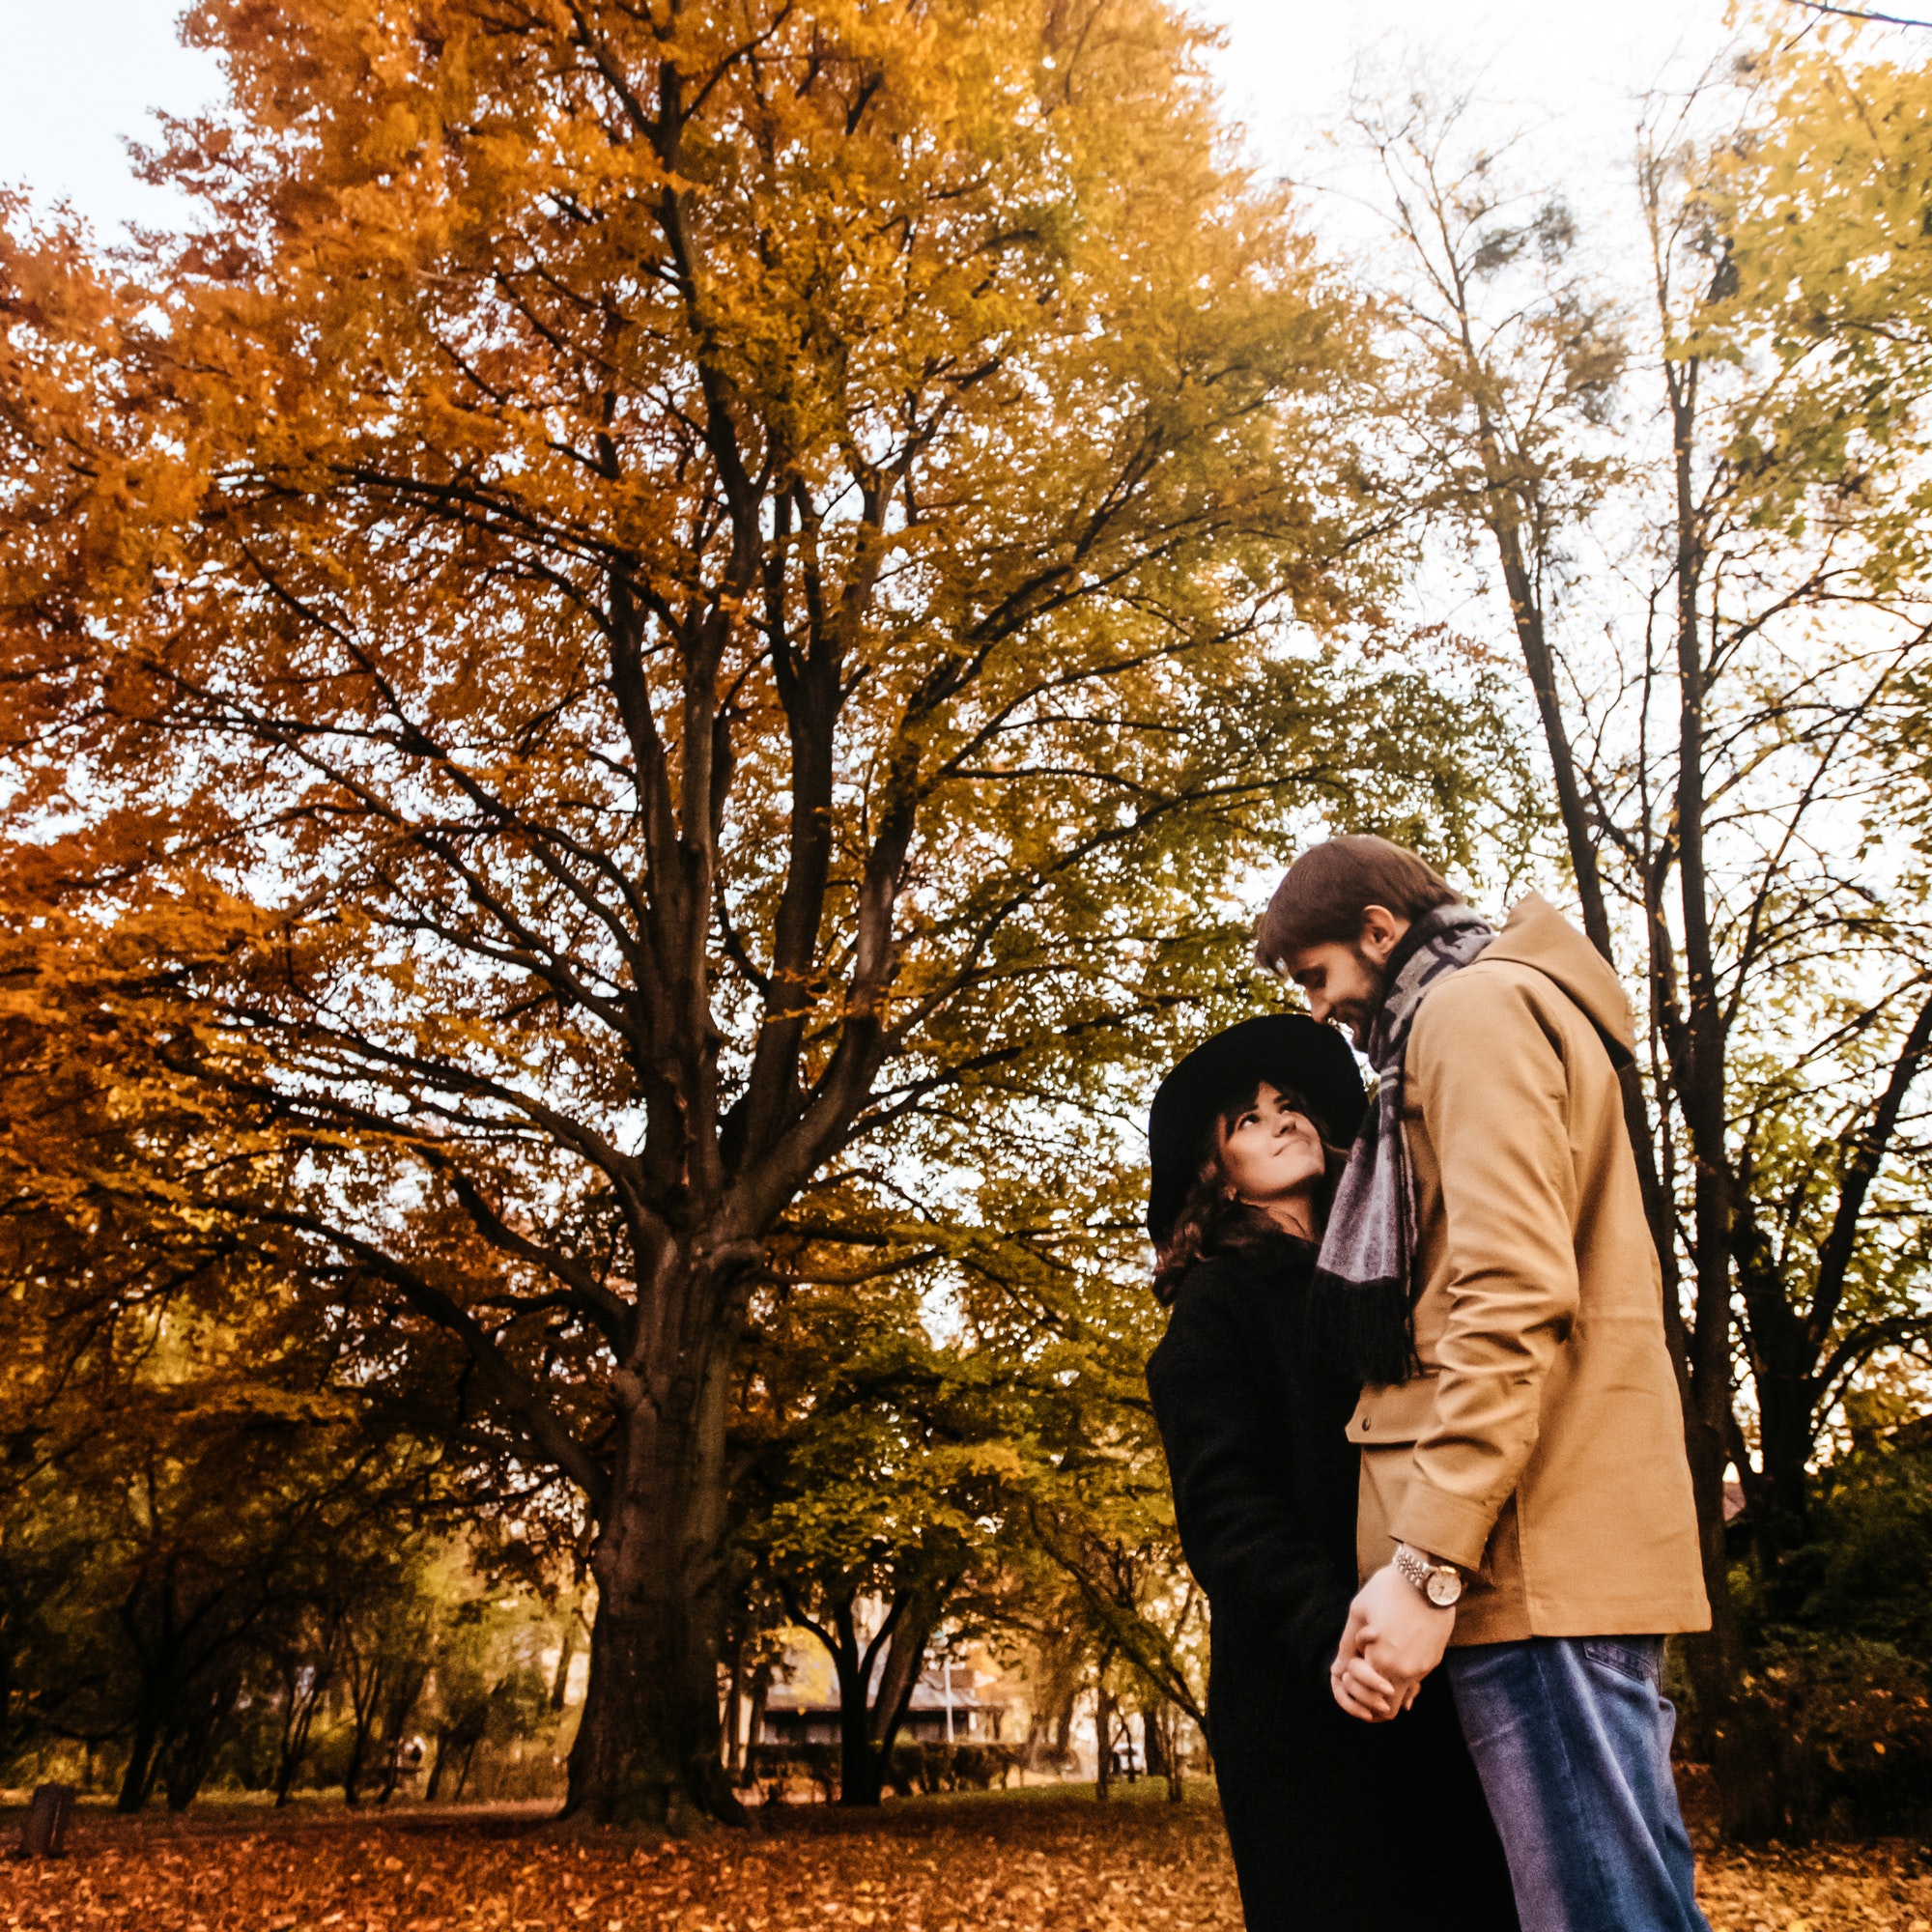 attractive happy luxury couple hugging and holding hands with tender in autumn colorful park